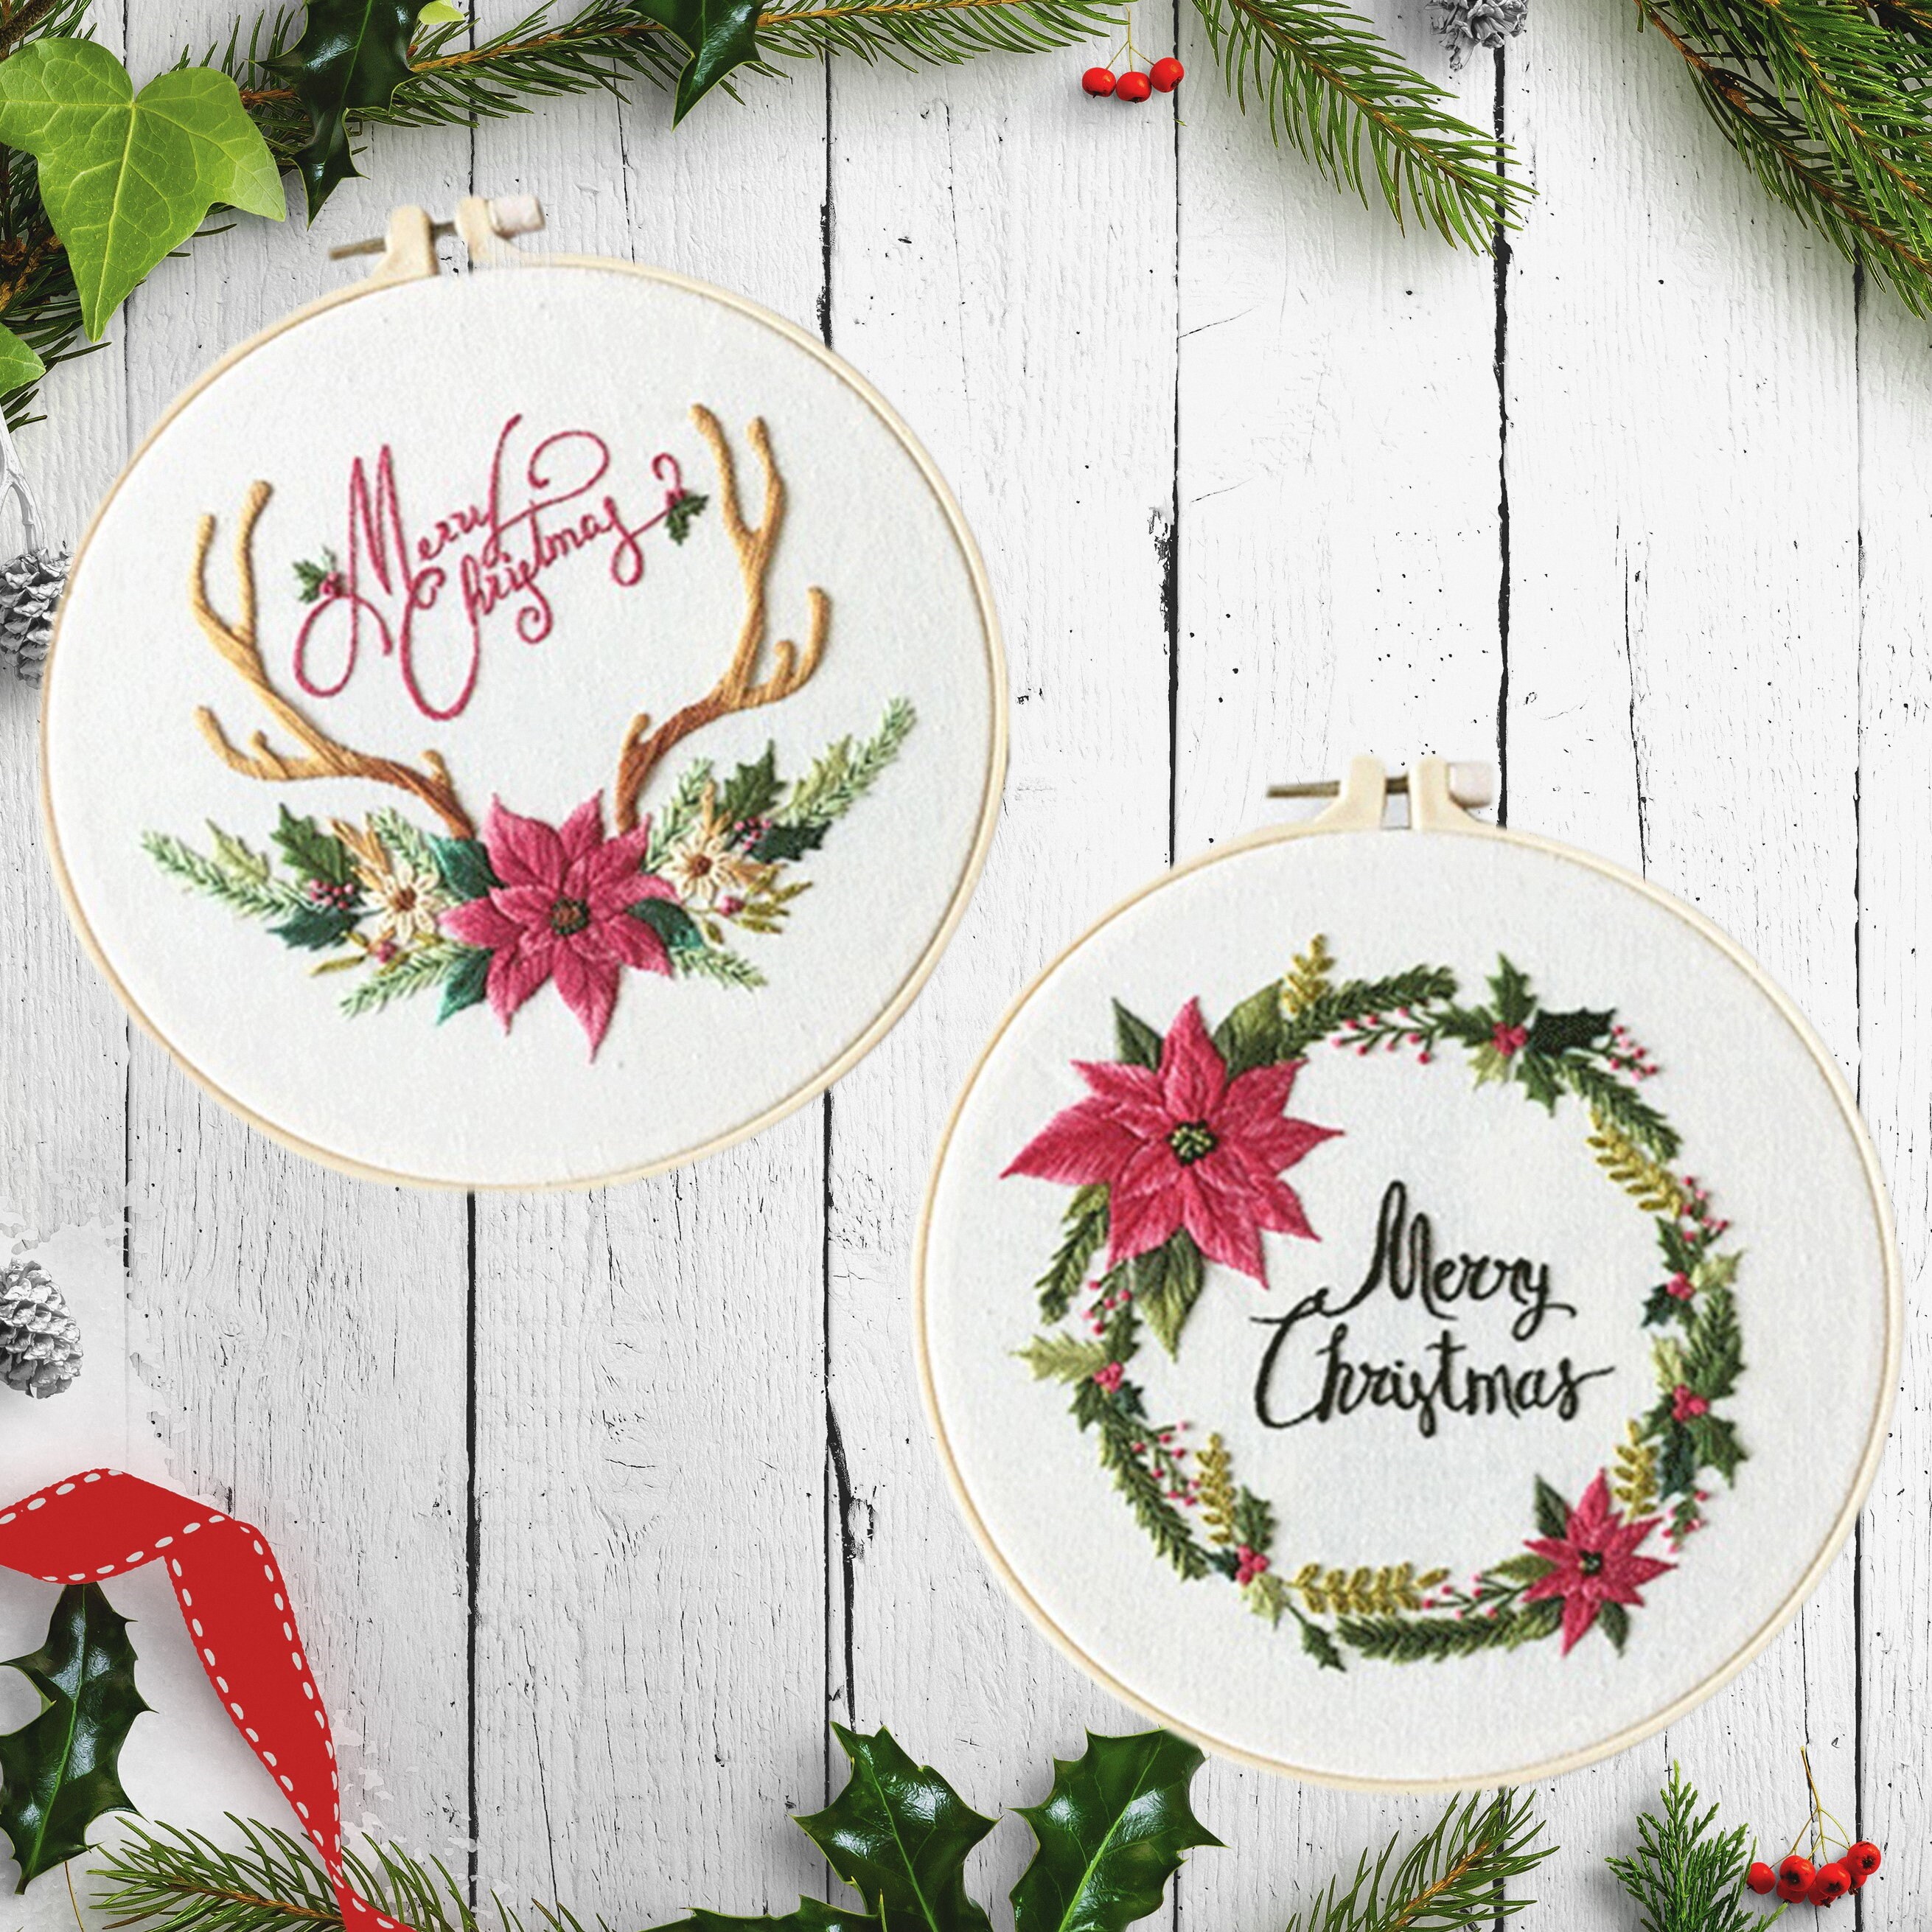 Christmas Embroidery kit with Patterns and Instructions, DIY Adult Merry  Christmas Cross Stitch Kits